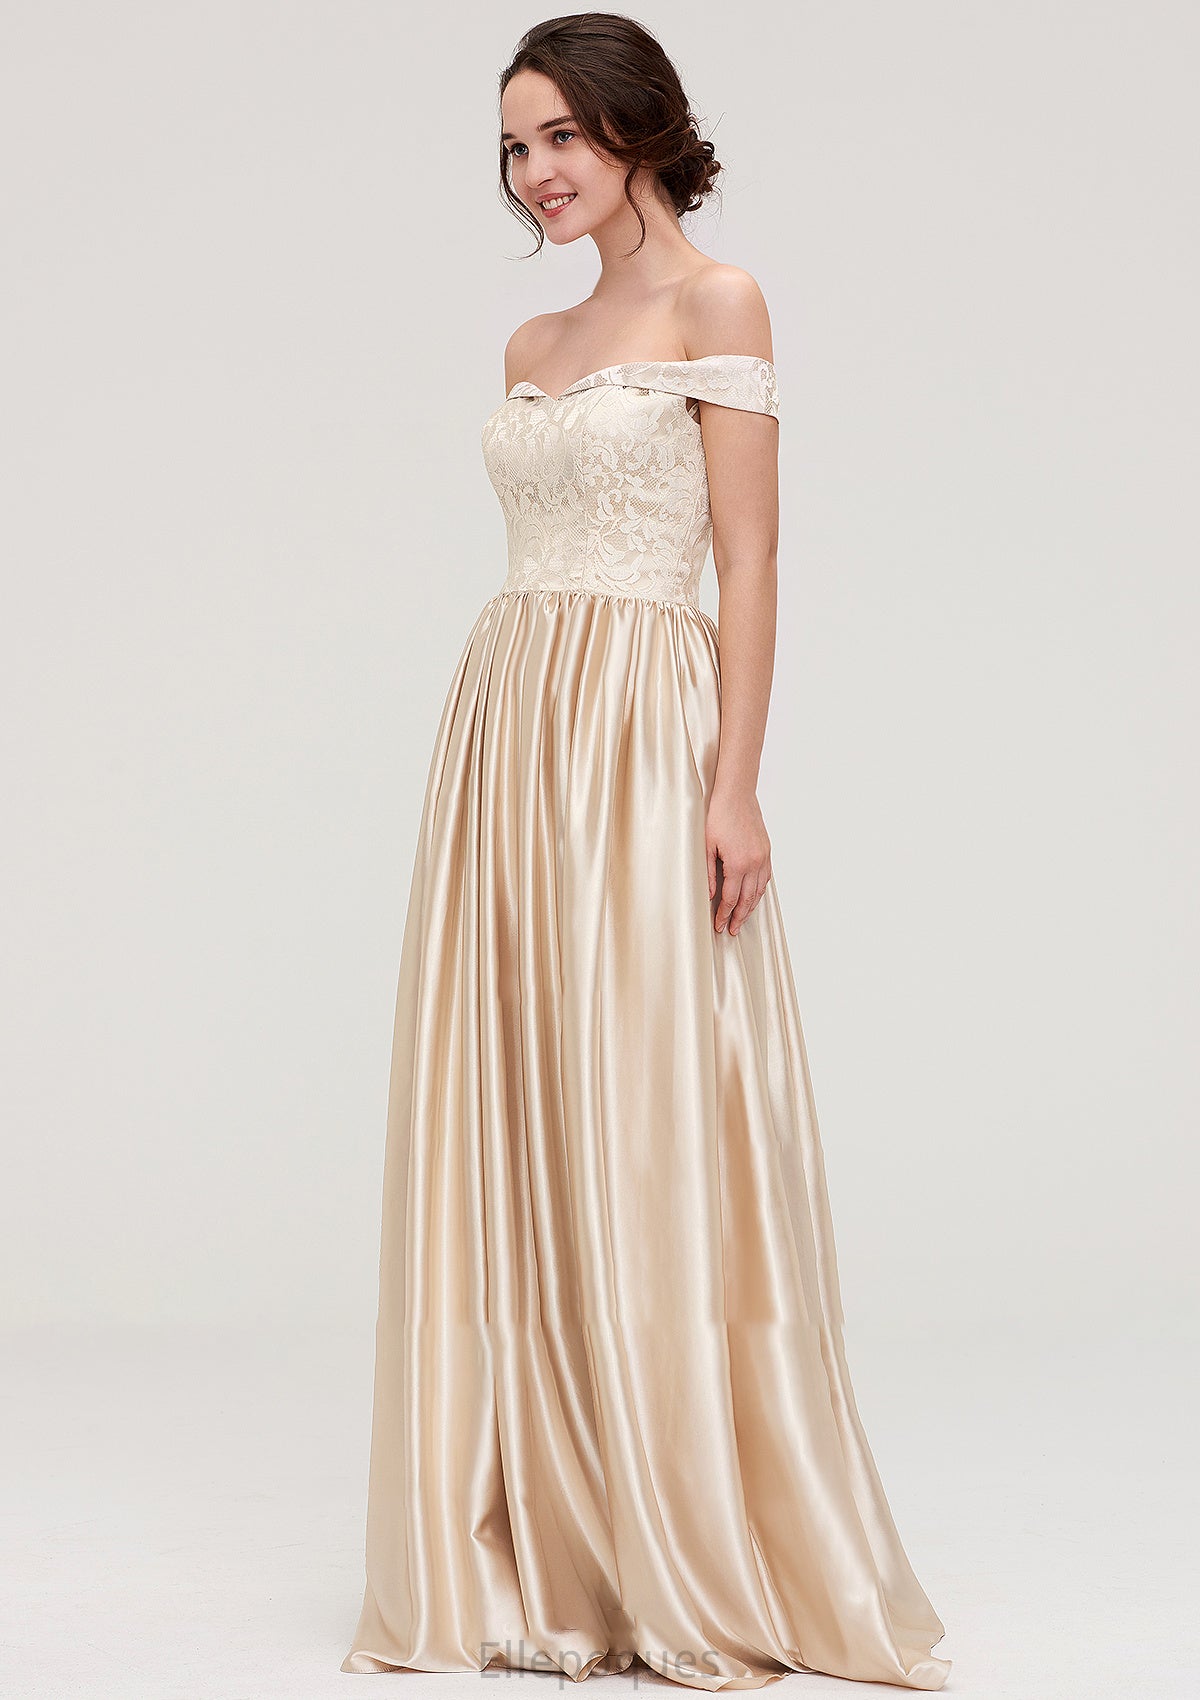 Off-the-Shoulder SleevelessA-line/Princess Charmeuse  Long/Floor-Length Bridesmaid Dresses With Appliqued Millicent HOP0025469